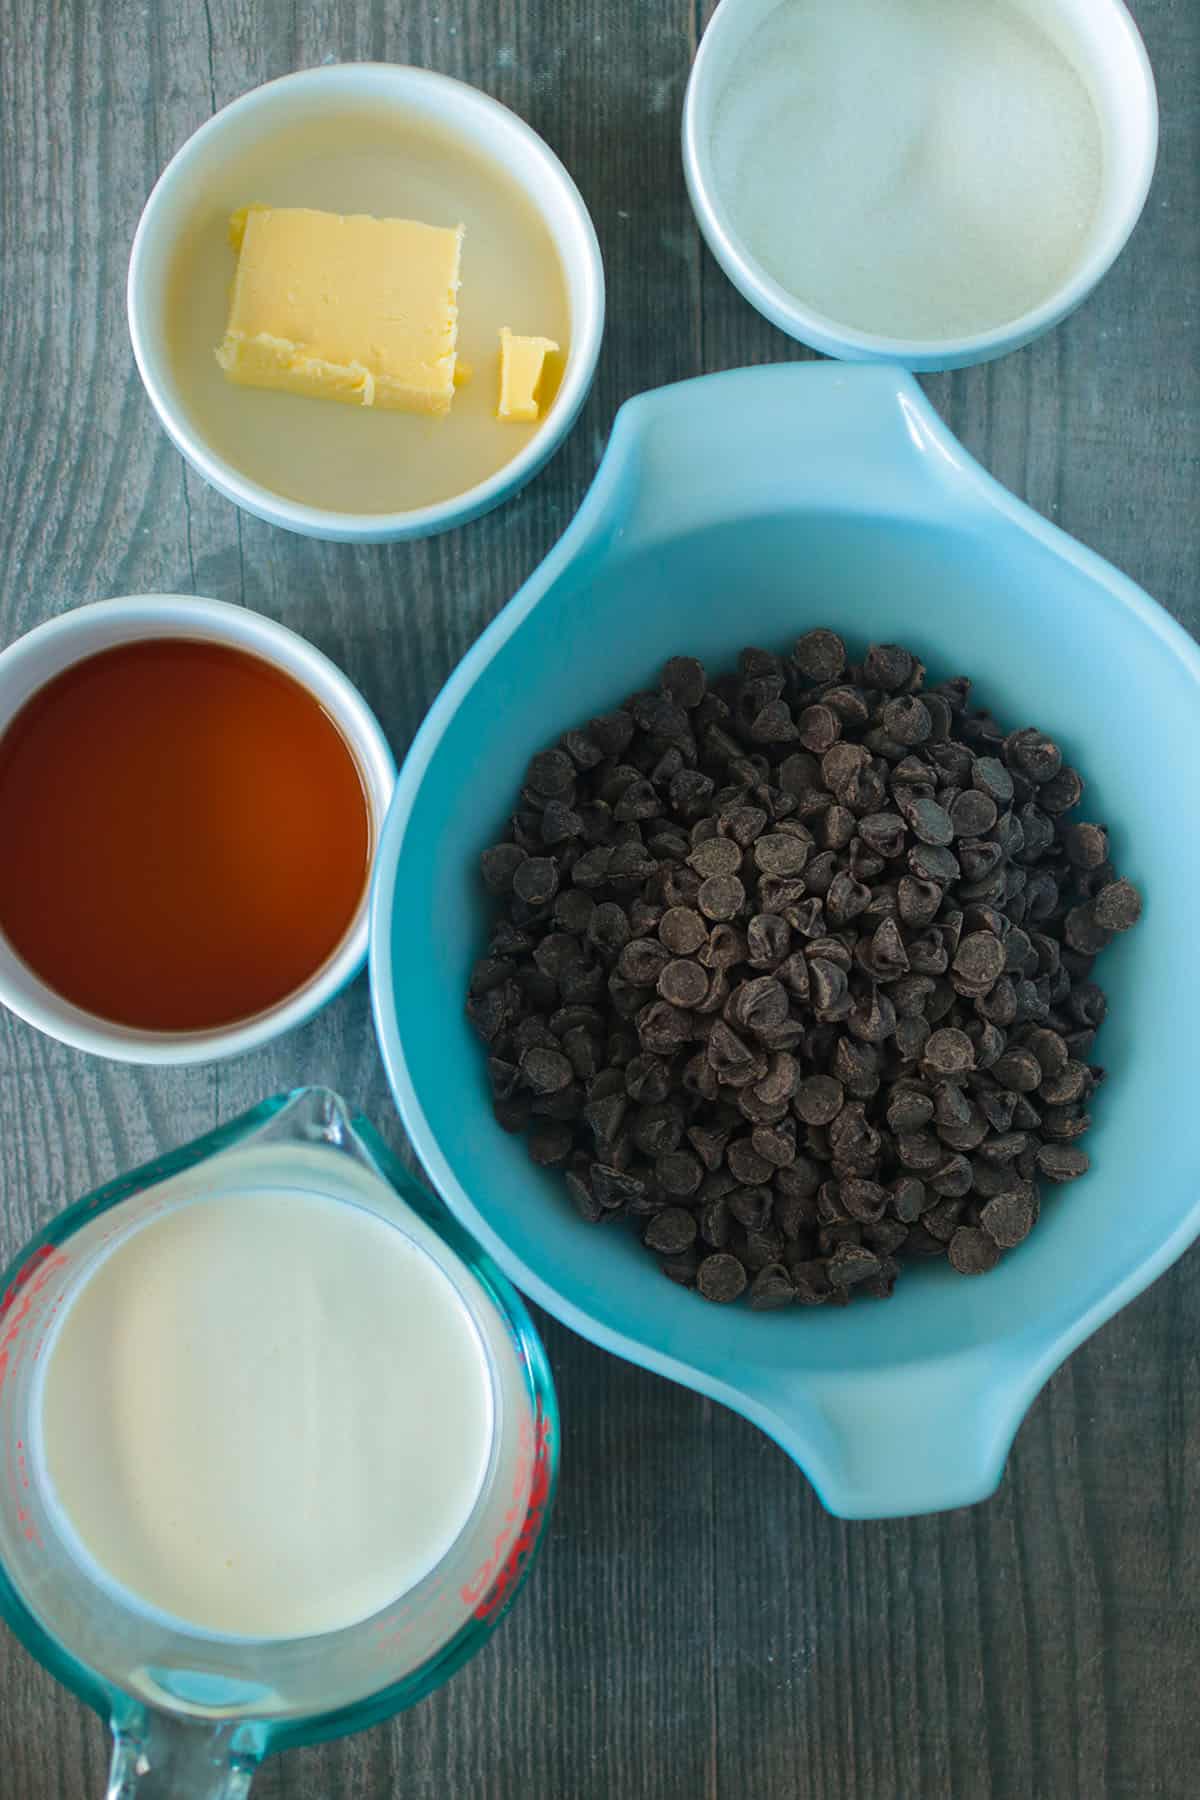 The ingredients for the chocolate ganache.